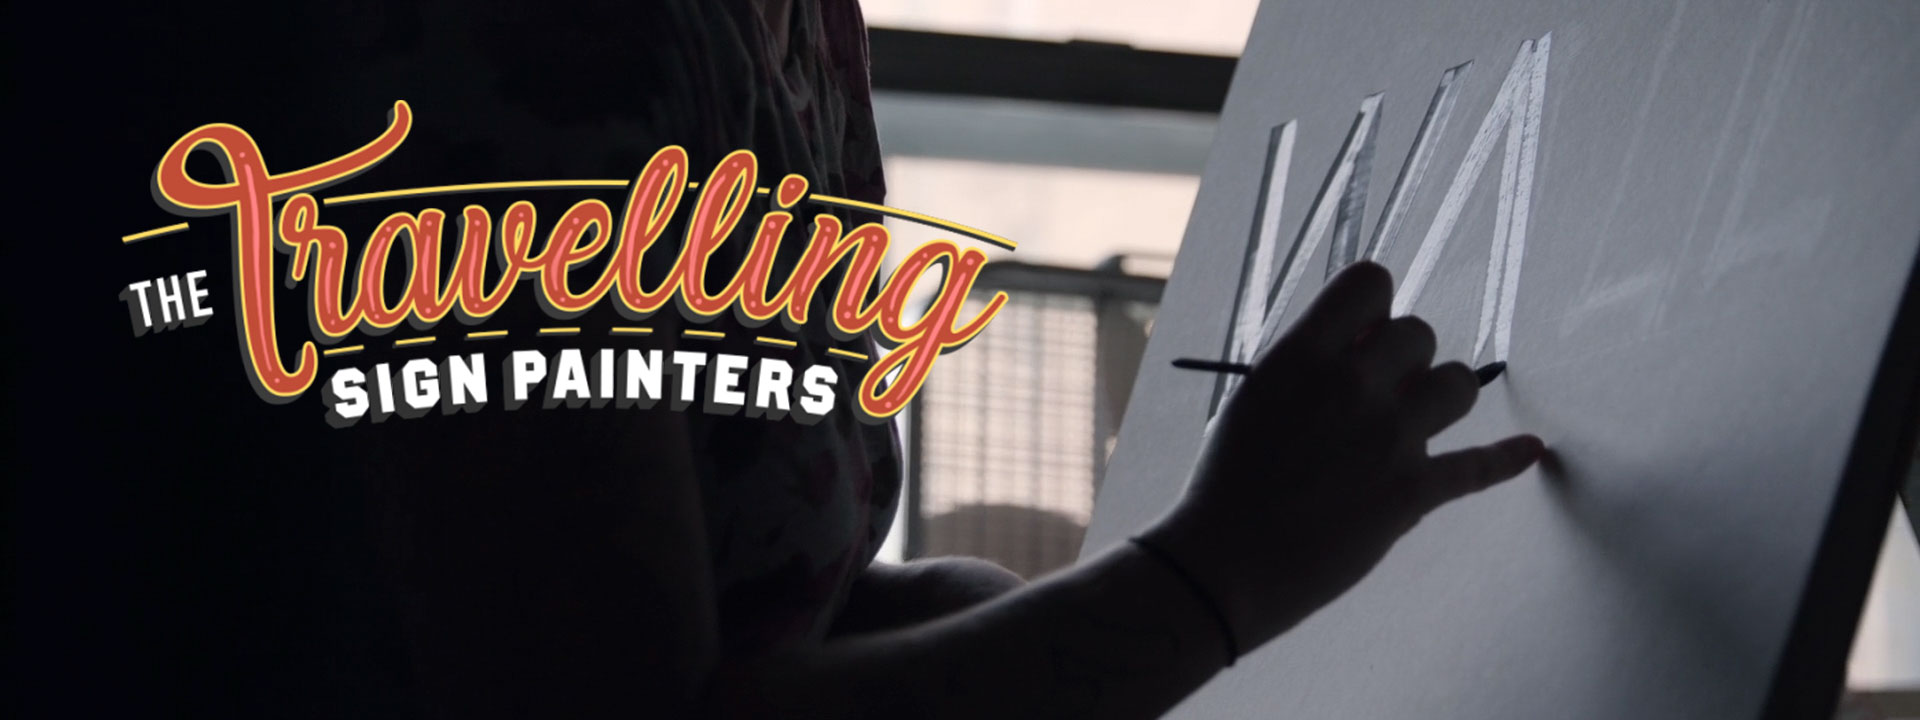 title graphic for Travelling Sign Painters